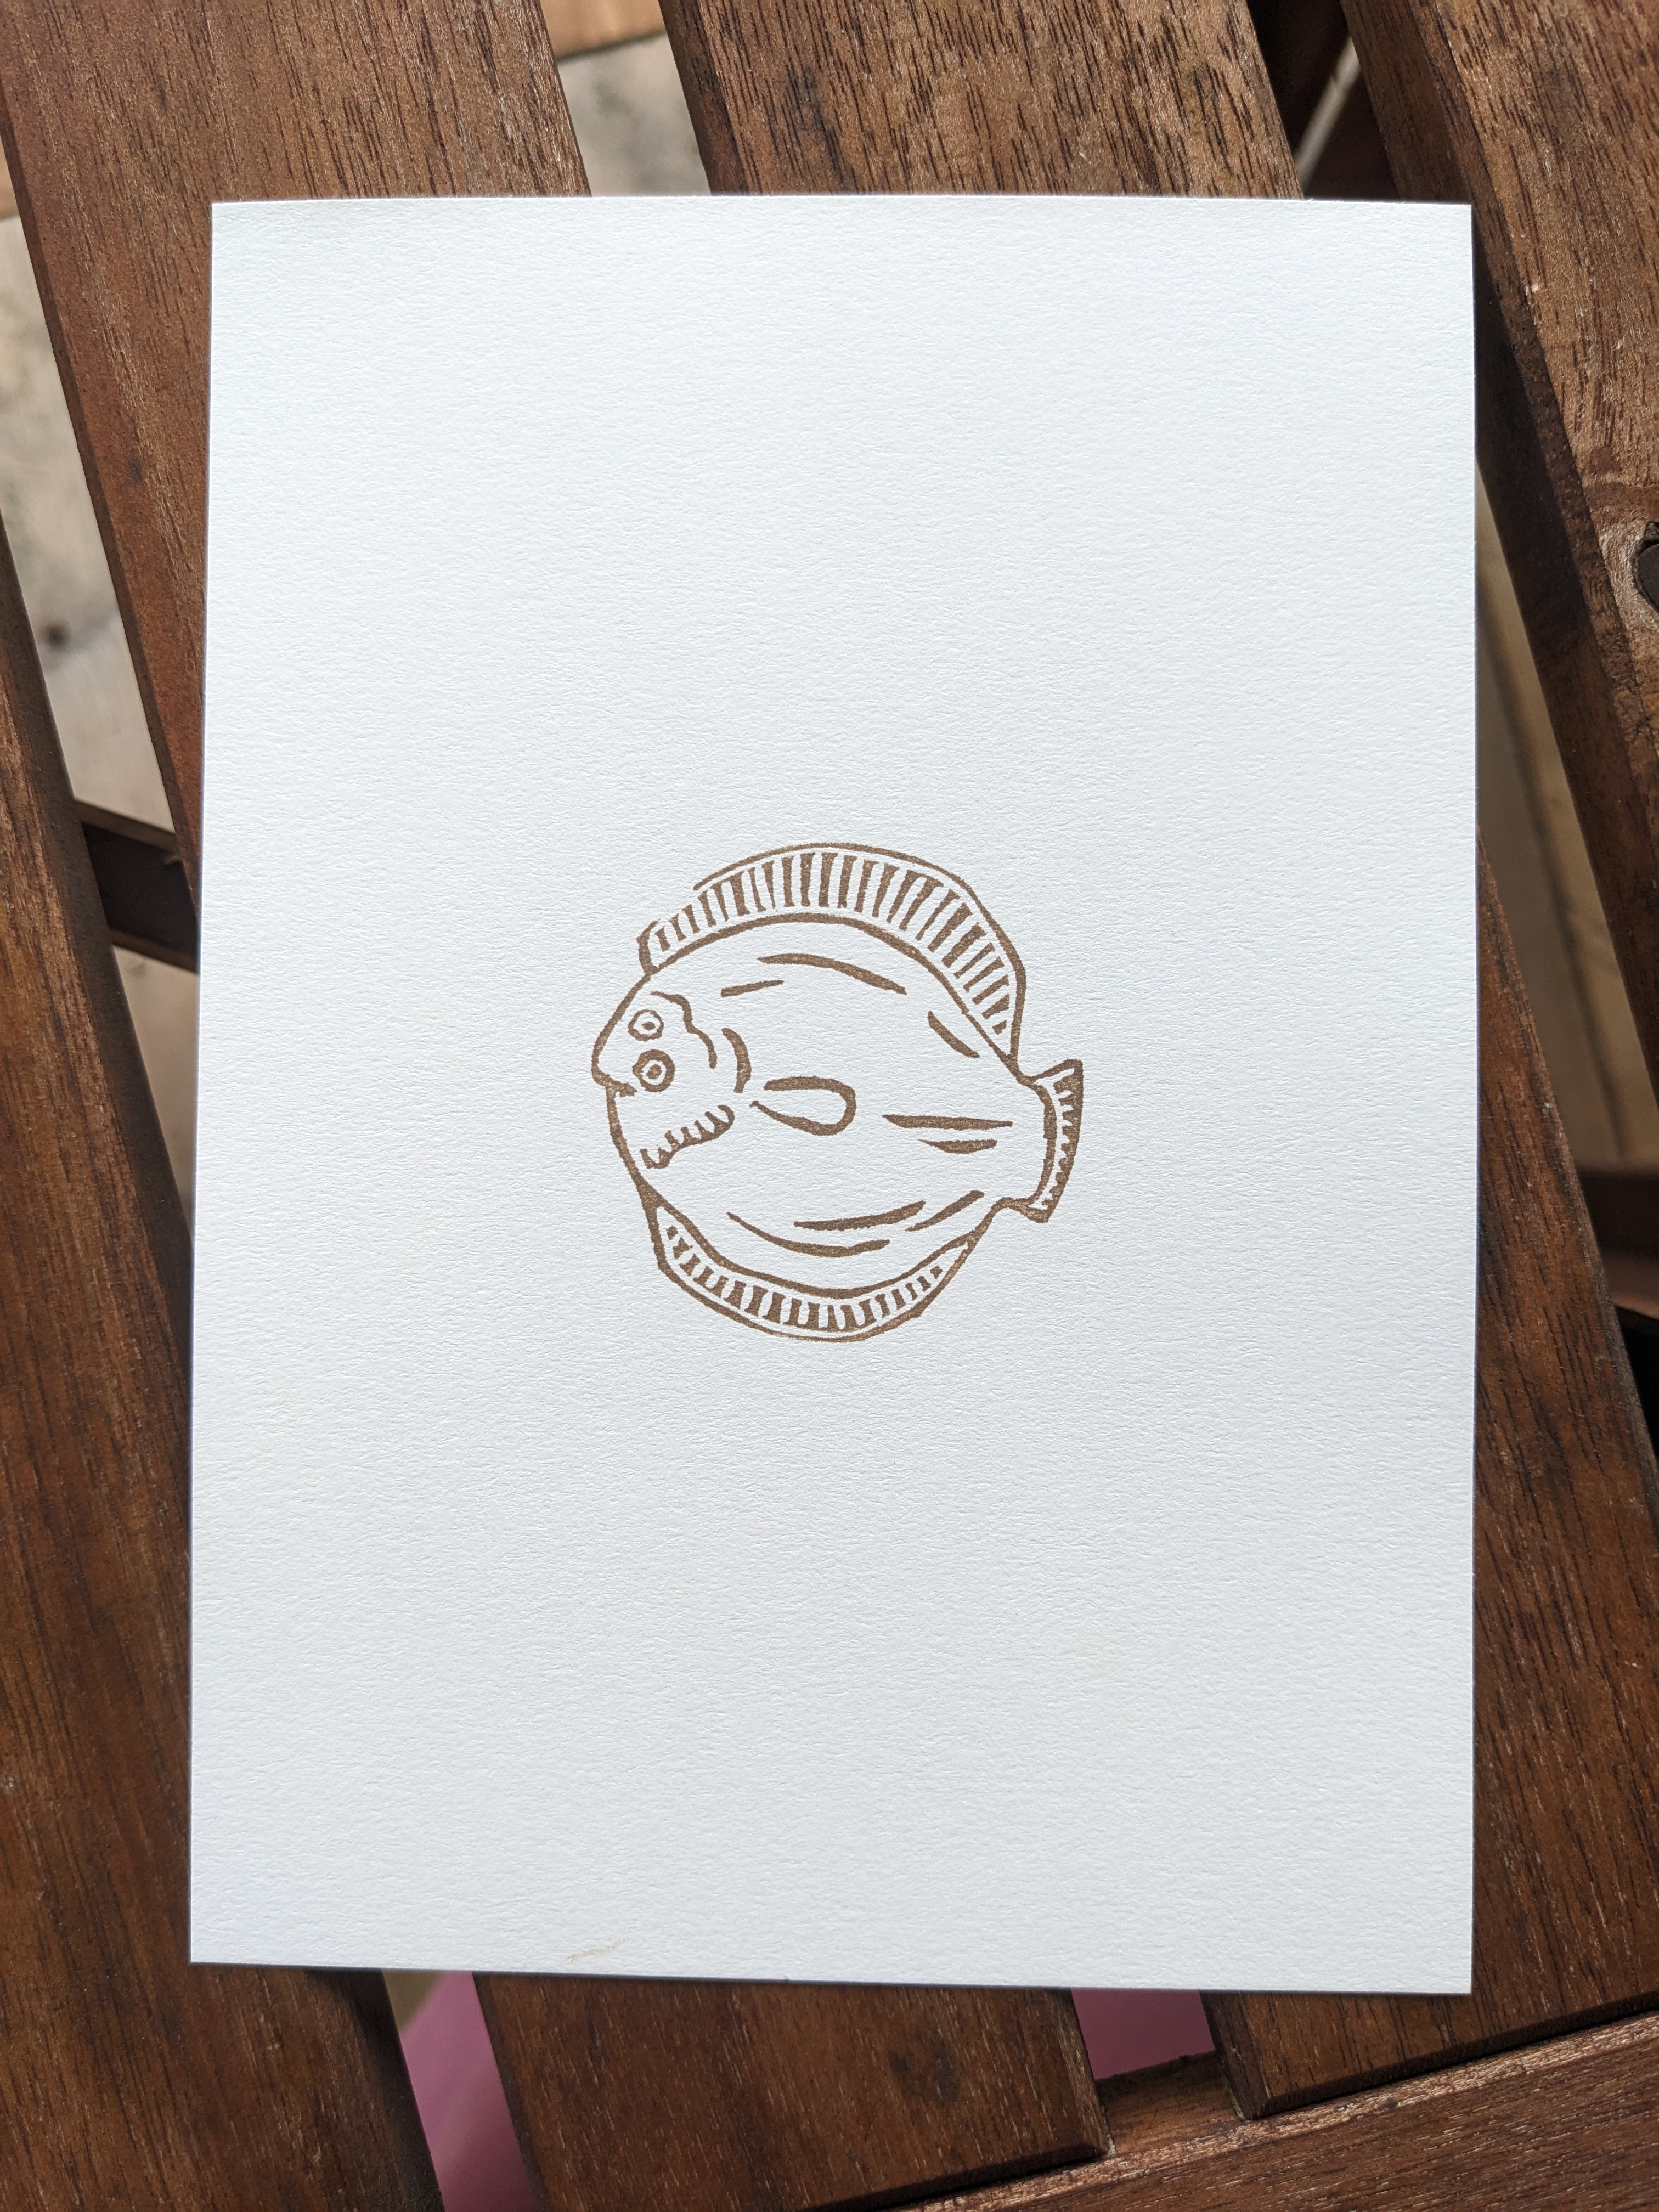 A print of a simple flatfish design inked in sepia.